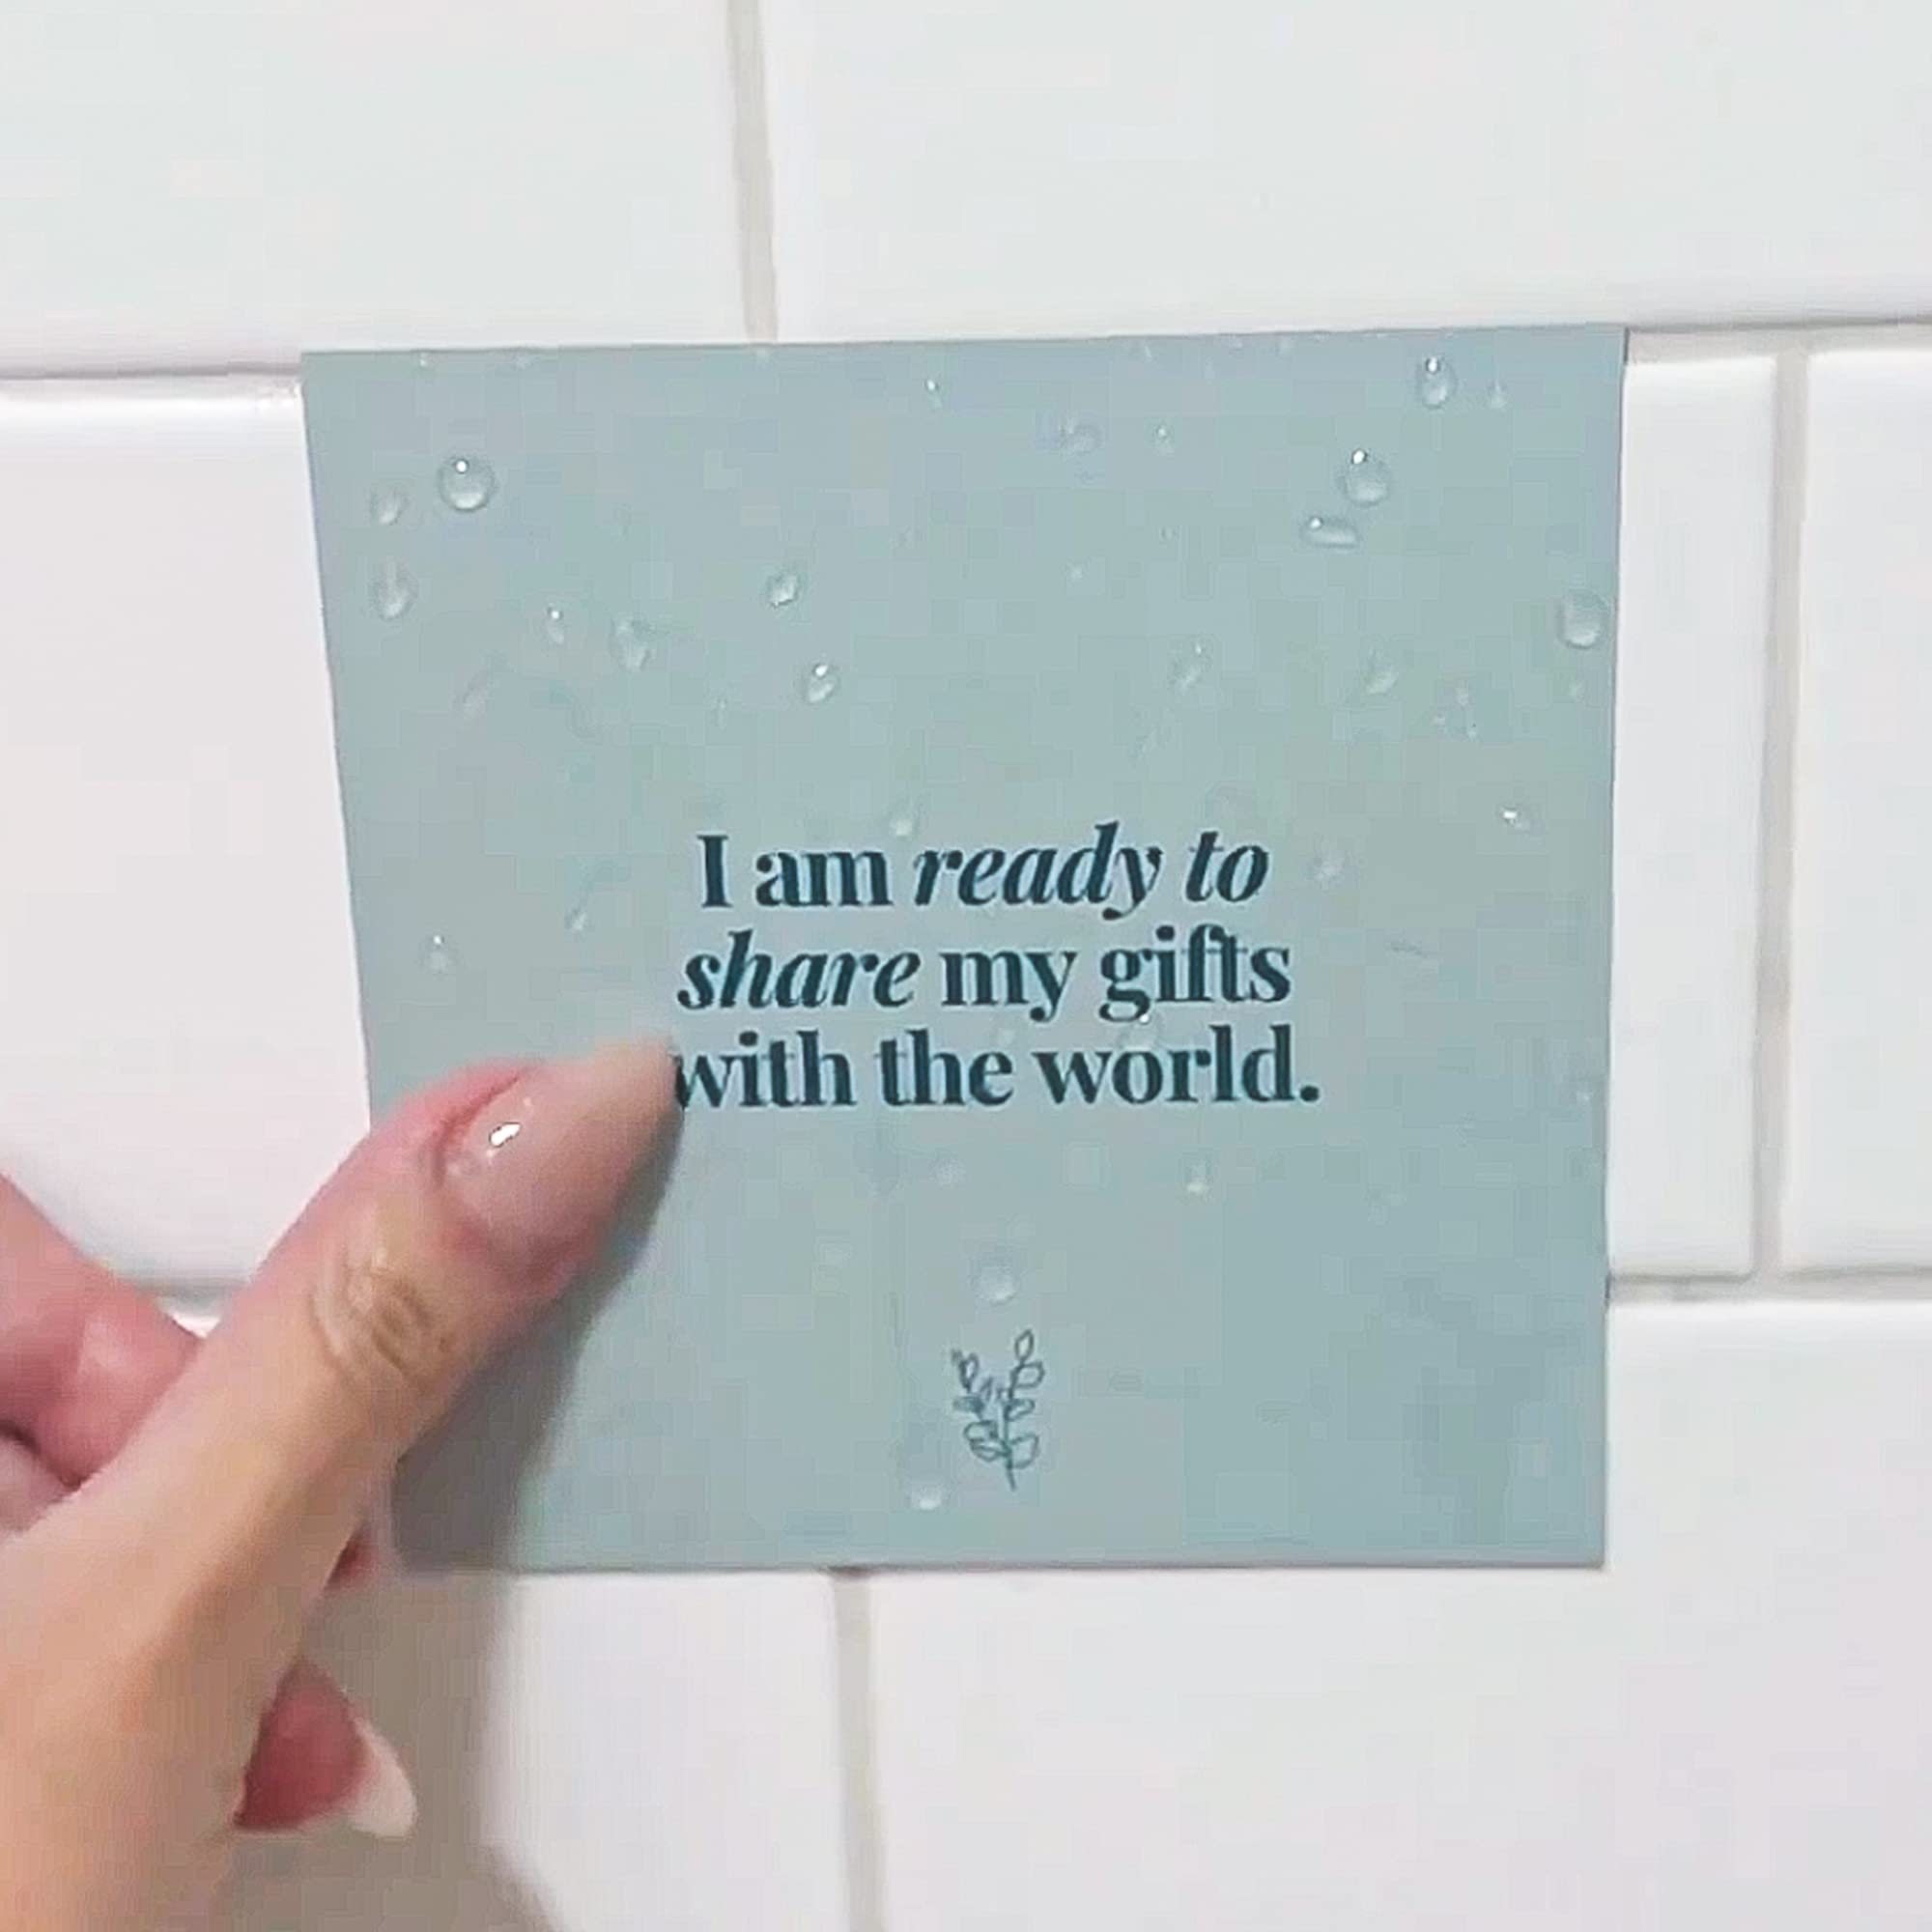 Self Care Shower Affirmation Cards [Waterproof] Positive Manifest For Women Meditation Daily Motivational Self-Empowering Quotes Girl Boss 15 Stress Relief Routine Set, Easy Stick and Remove From Shower and Mirror